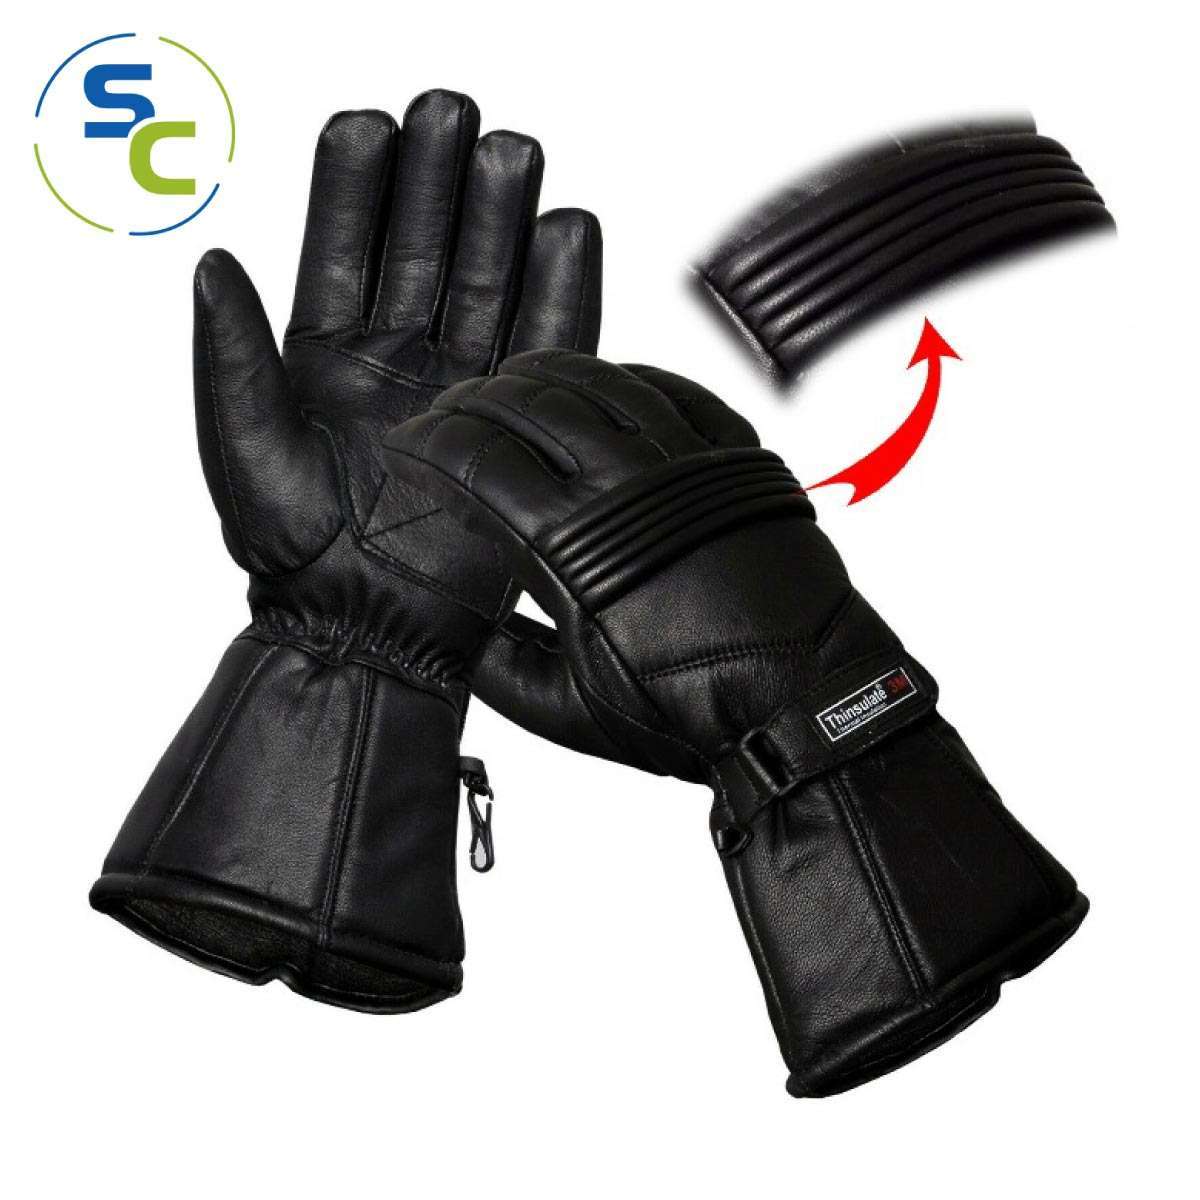 Full Padded Protection Leather Motorbike Gloves Waterproof Thermal 